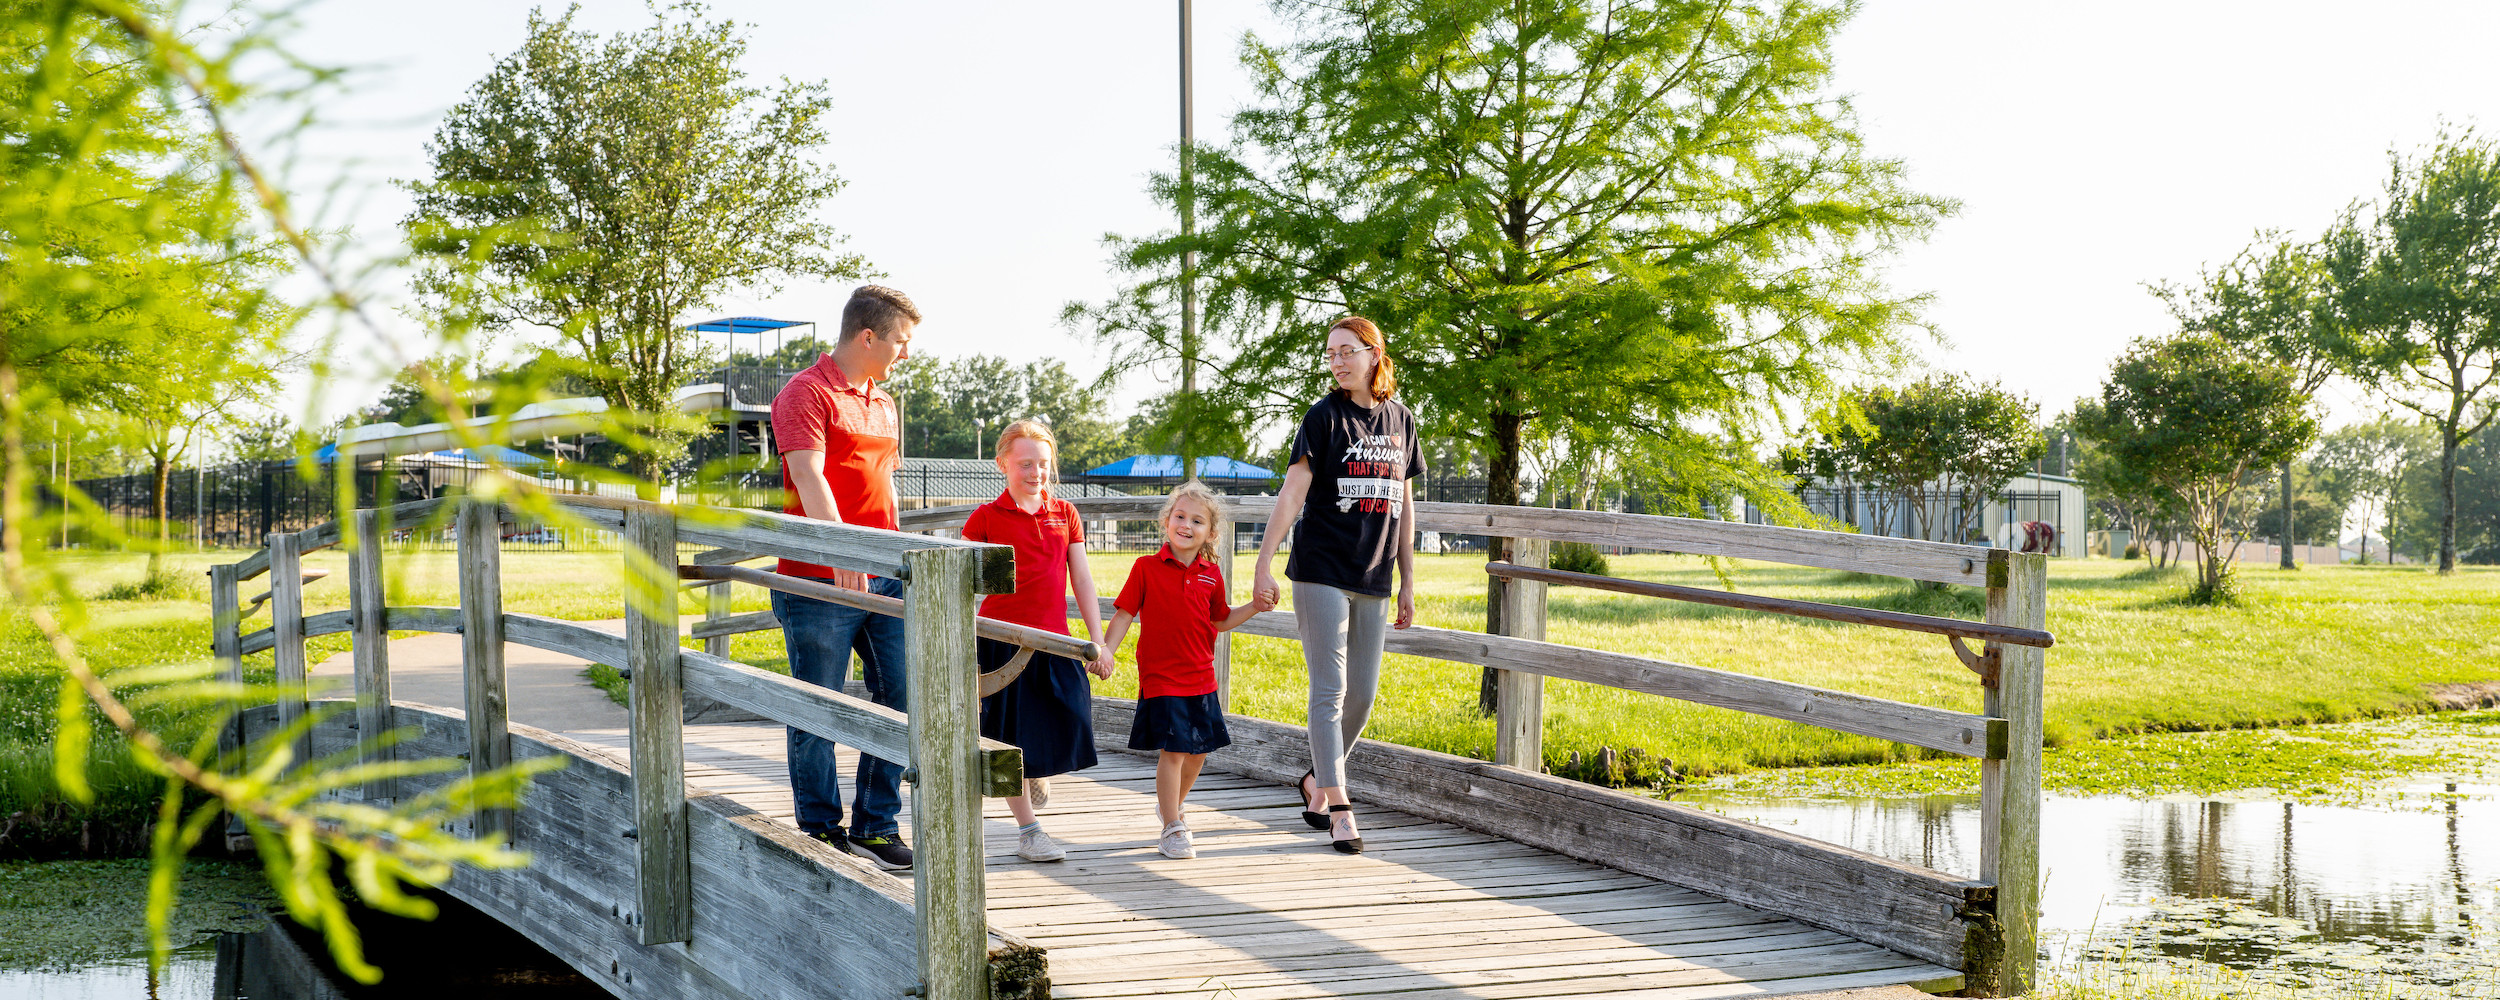 Family walking over a bridge in a local park